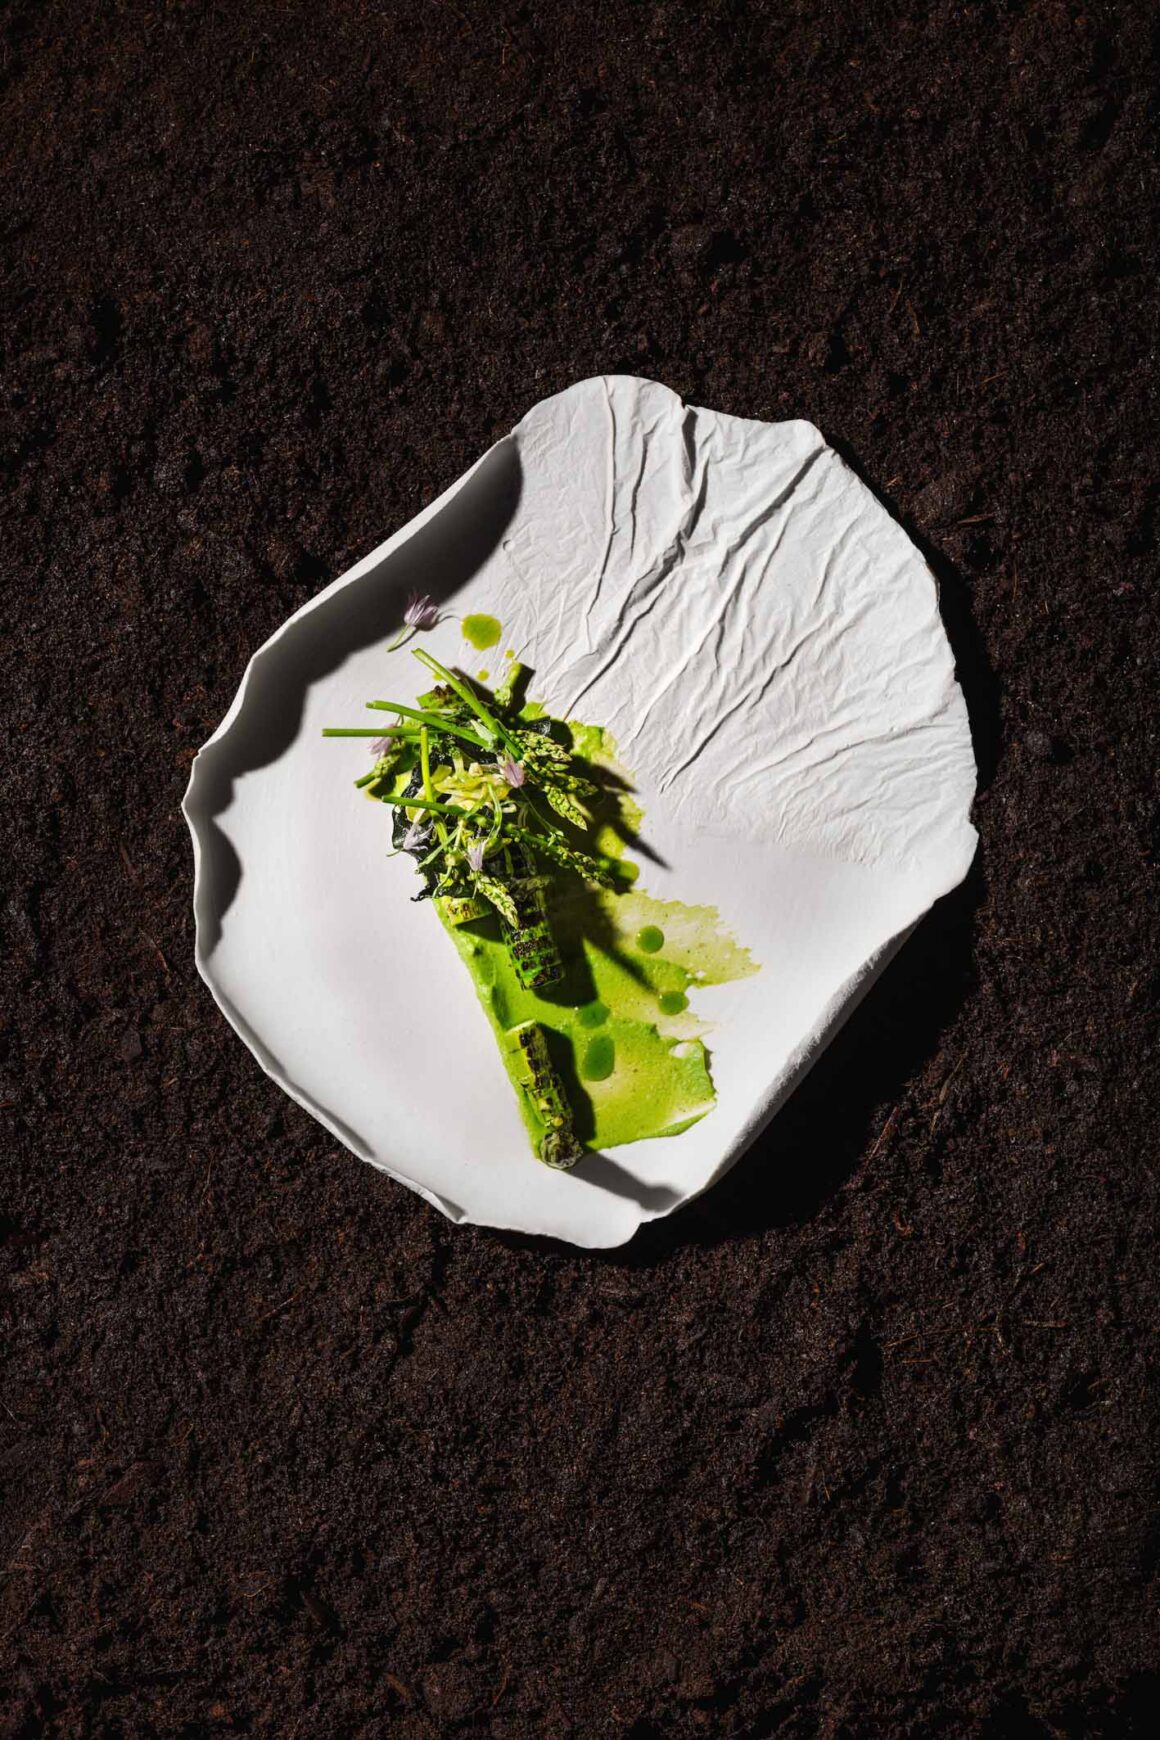 Berries and Spice | Steinbesser Experimental Gastronomy: when food, art and sustainability meet with elegance and playfulness